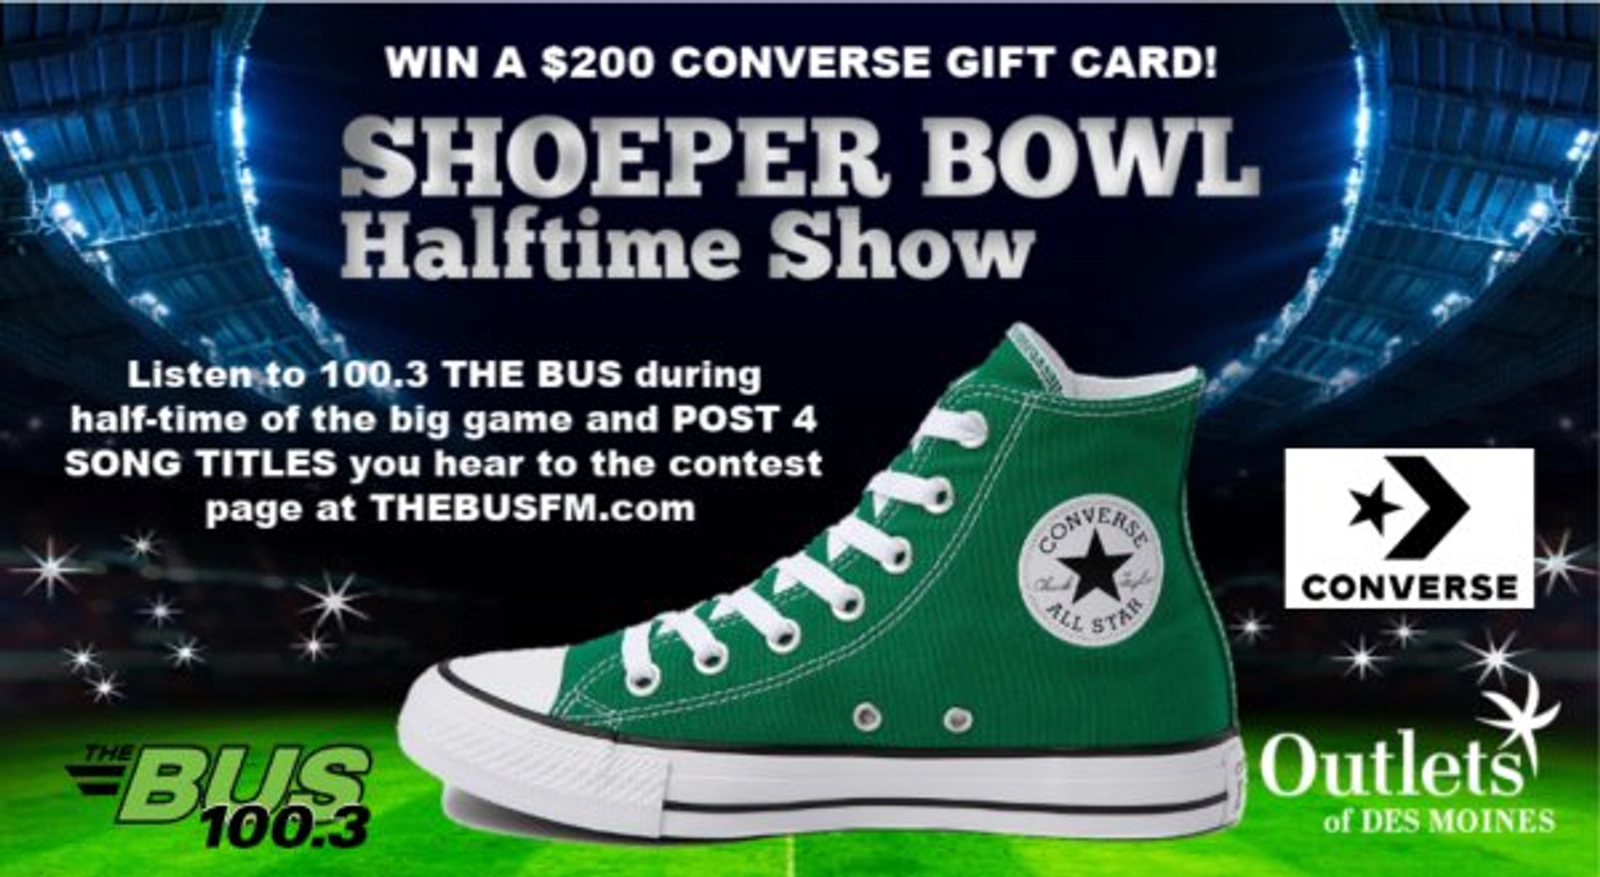 SHOEPER BOWL Halftime Show - Win a $200 Converse Gift Card! - Thumbnail Image